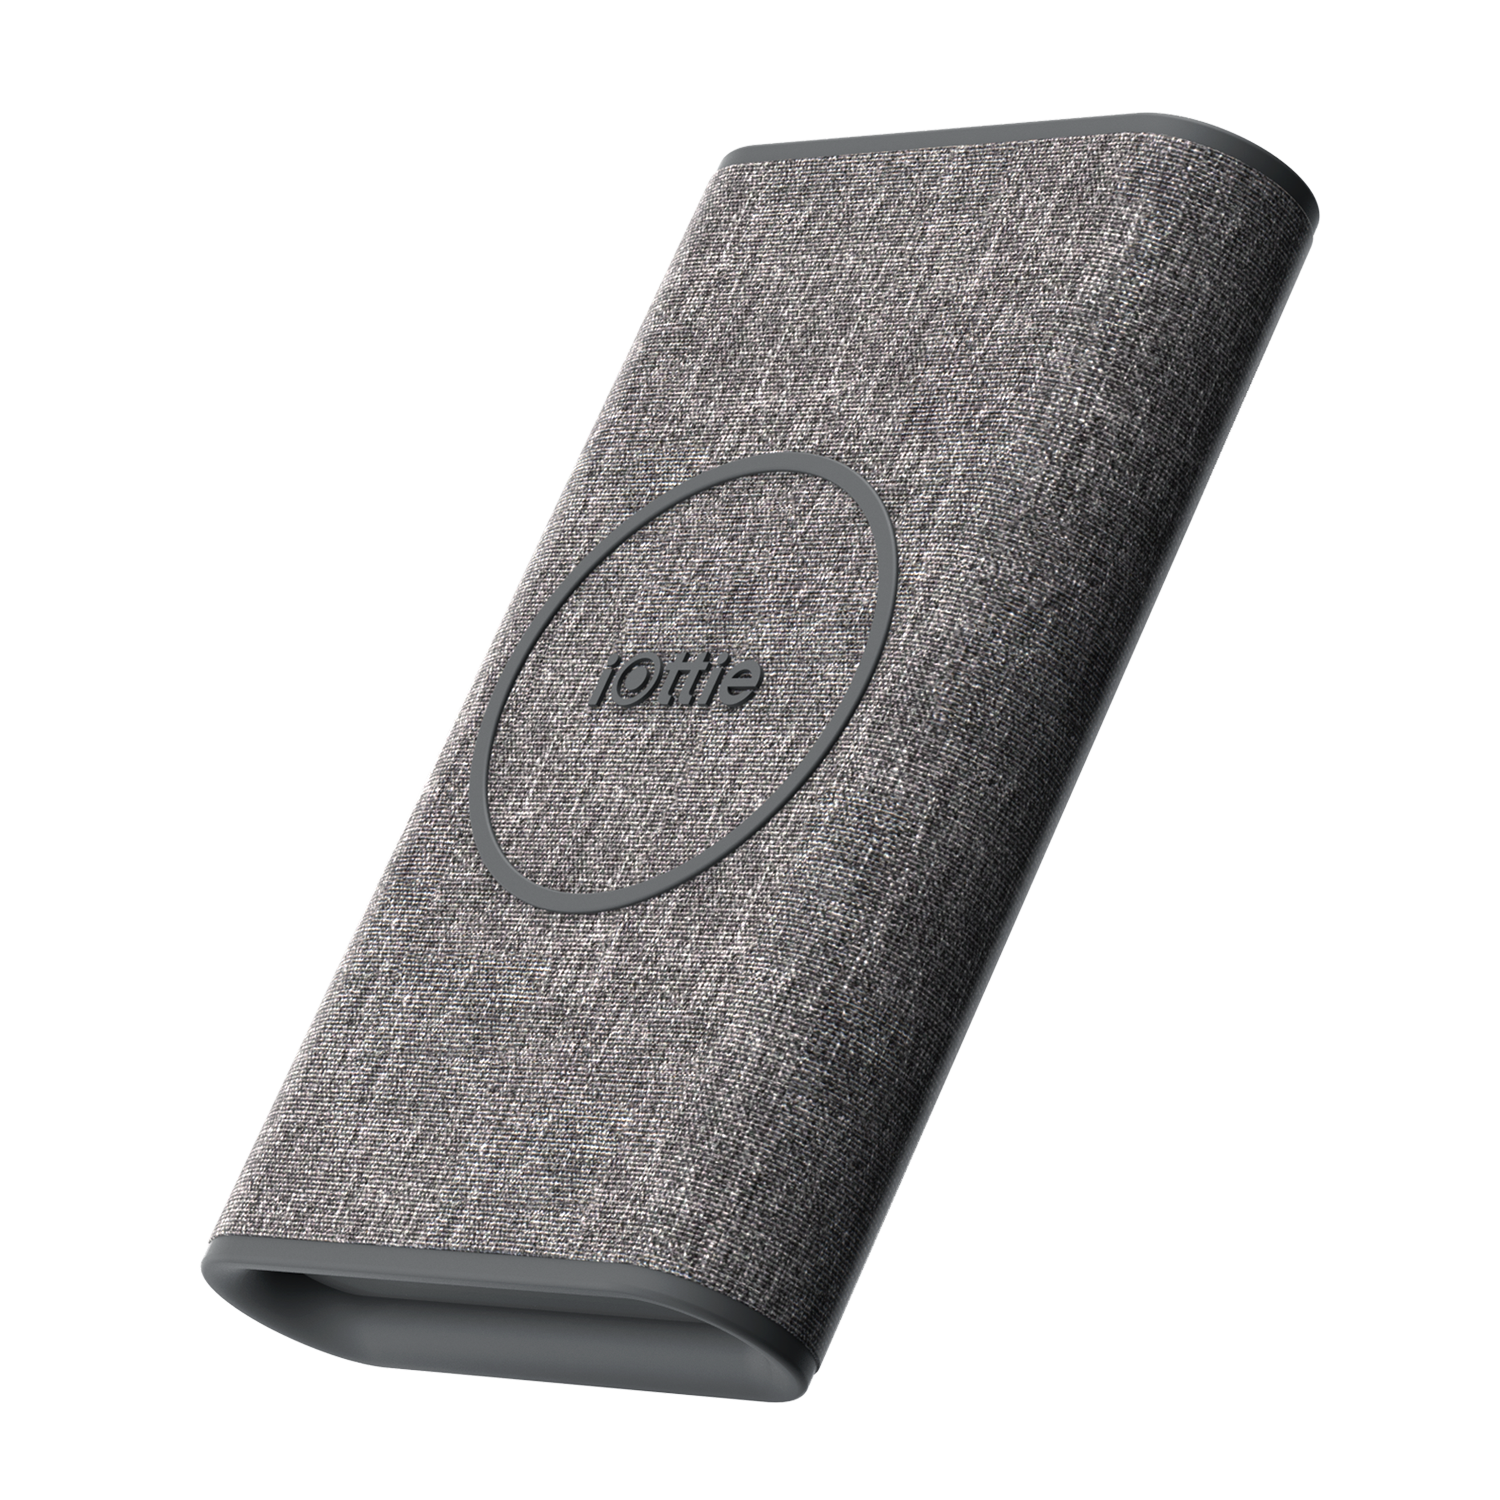 iON Wireless Go Power Bank in Ash, Portable Charger